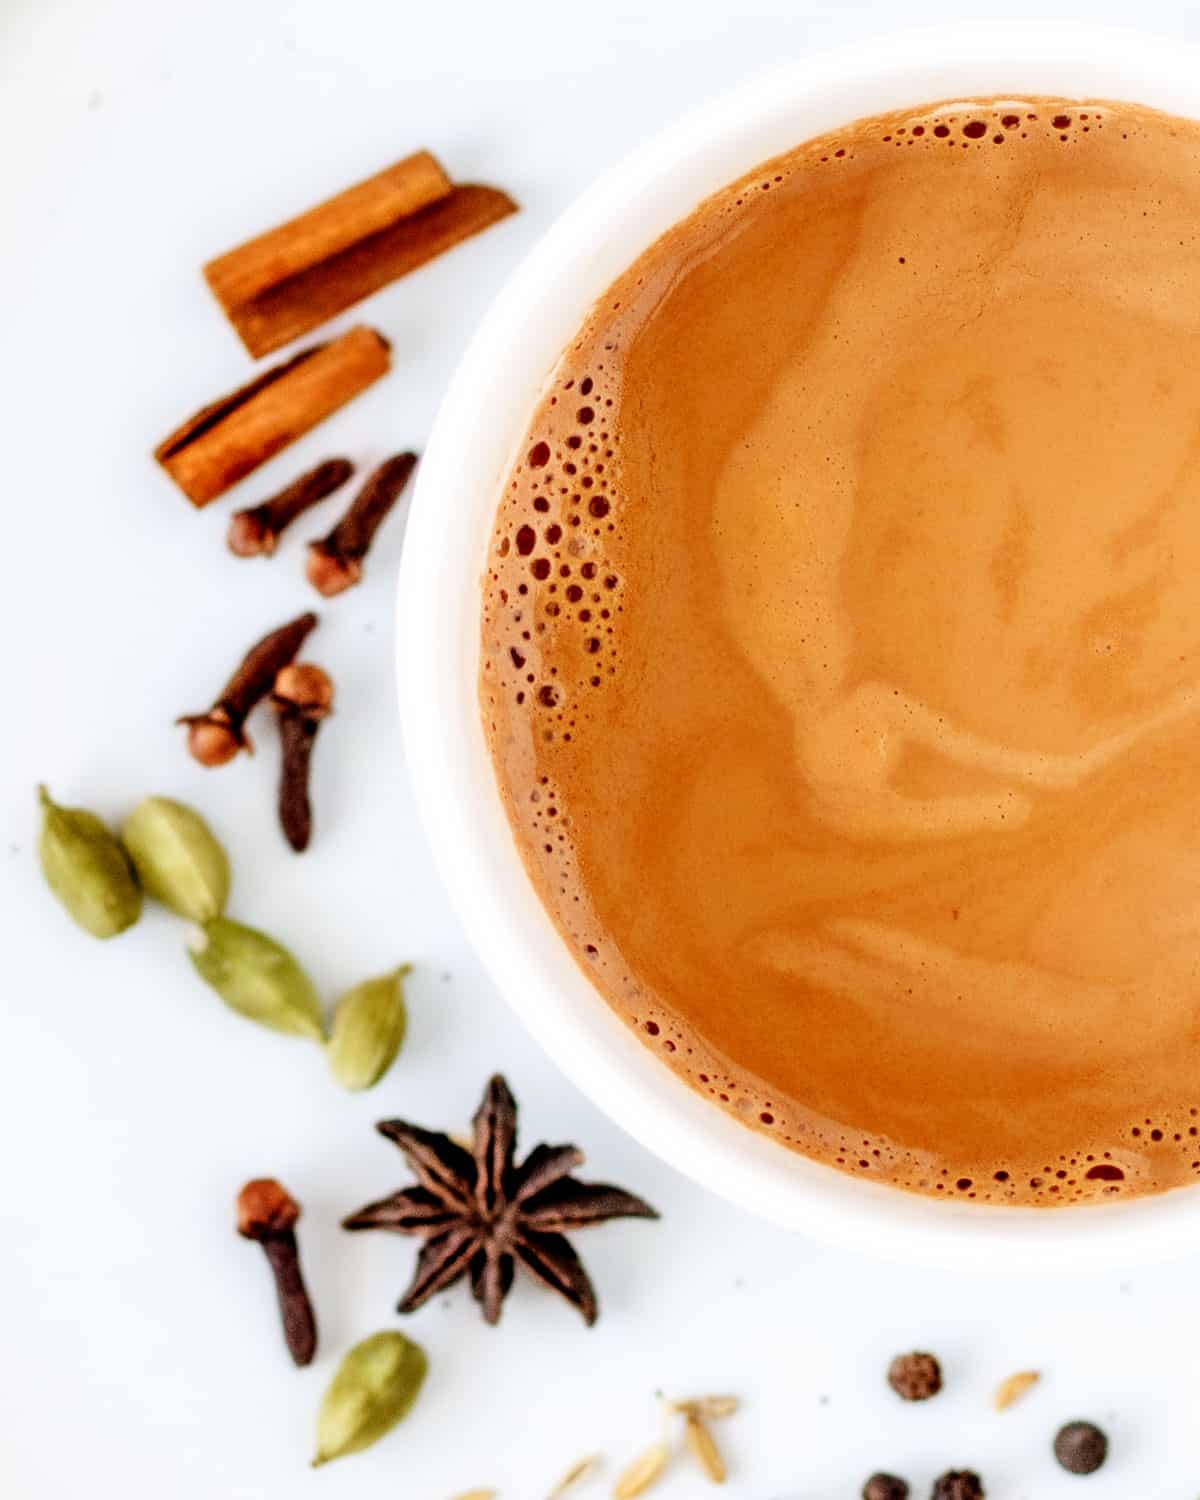 Cup of masala chai with spices on tile.